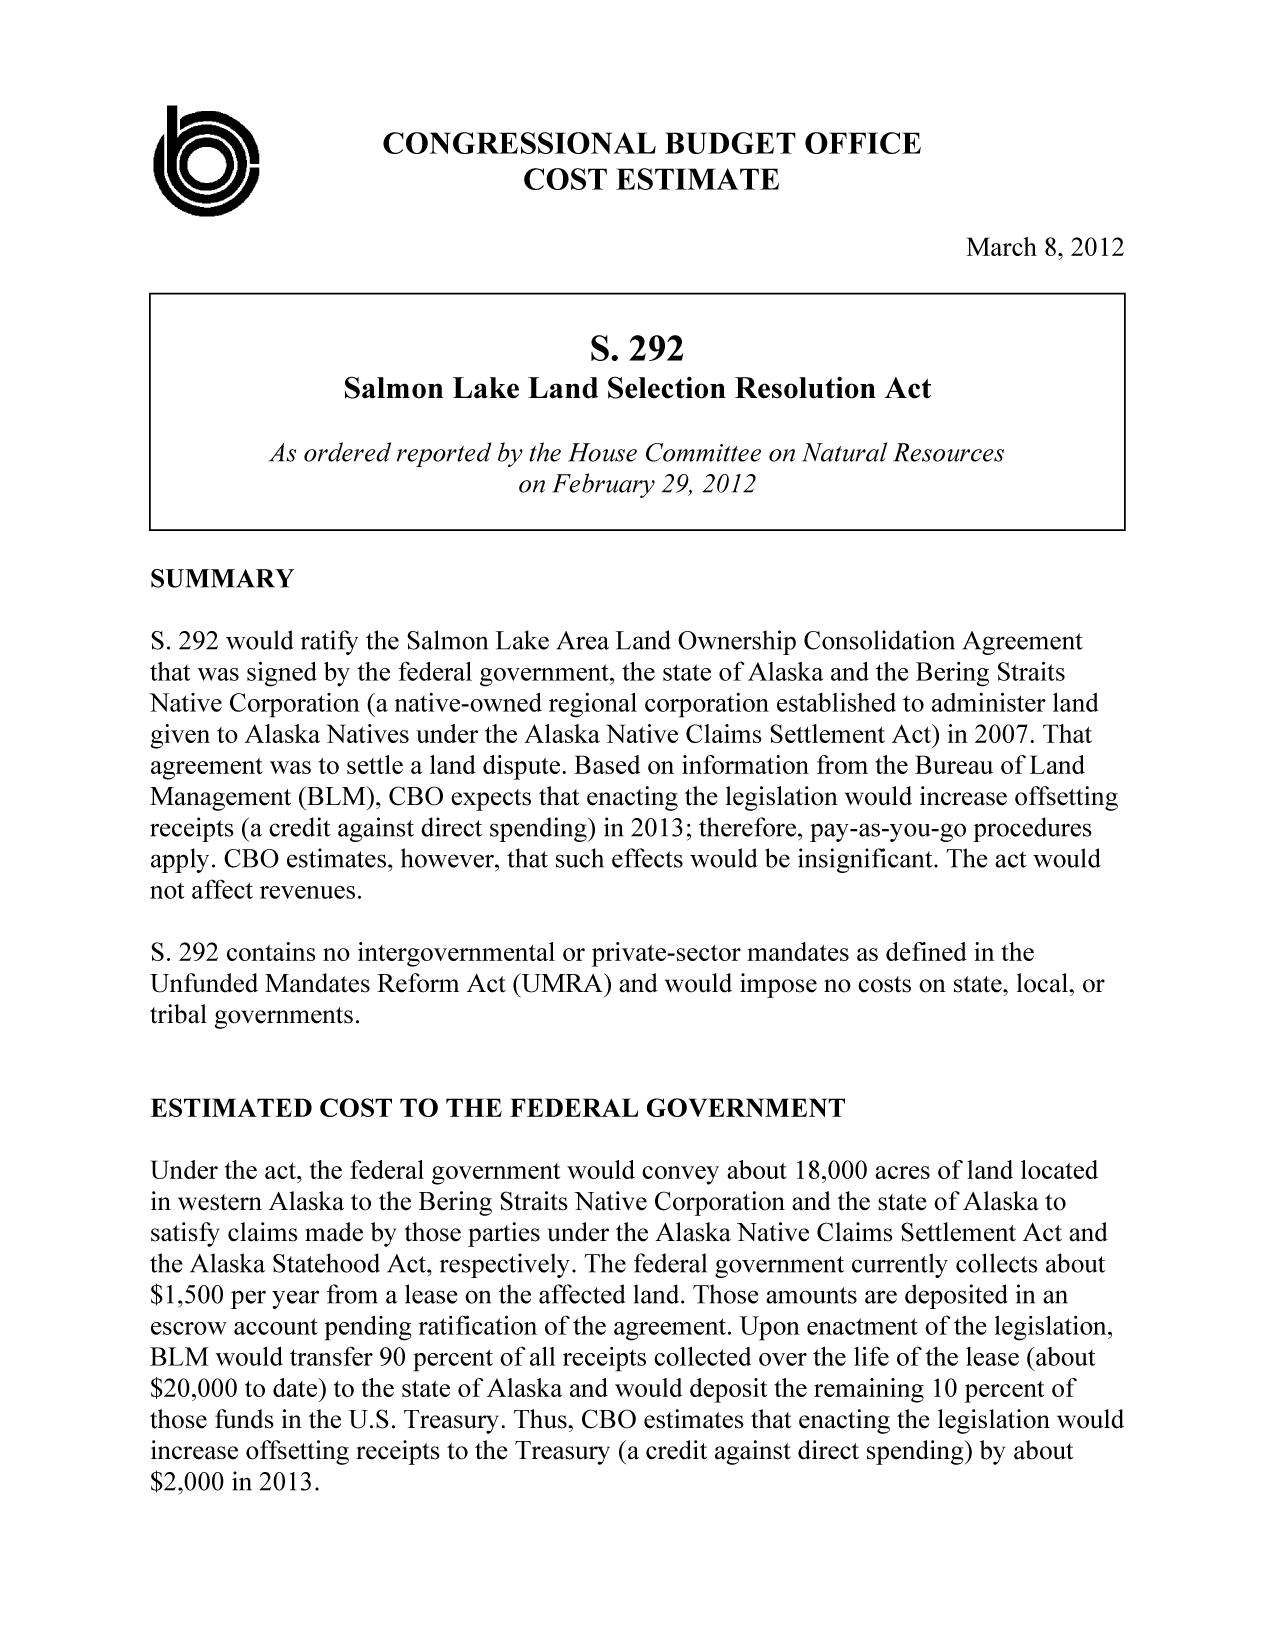 handle is hein.congrec/cbo10661 and id is 1 raw text is: CONGRESSIONAL BUDGET OFFICE
COST ESTIMATE
March 8, 2012
S. 292
Salmon Lake Land Selection Resolution Act
As ordered reported by the House Committee on Natural Resources
on February 29, 2012
SUMMARY
S. 292 would ratify the Salmon Lake Area Land Ownership Consolidation Agreement
that was signed by the federal government, the state of Alaska and the Bering Straits
Native Corporation (a native-owned regional corporation established to administer land
given to Alaska Natives under the Alaska Native Claims Settlement Act) in 2007. That
agreement was to settle a land dispute. Based on information from the Bureau of Land
Management (BLM), CBO expects that enacting the legislation would increase offsetting
receipts (a credit against direct spending) in 2013; therefore, pay-as-you-go procedures
apply. CBO estimates, however, that such effects would be insignificant. The act would
not affect revenues.
S. 292 contains no intergovernmental or private-sector mandates as defined in the
Unfunded Mandates Reform Act (UMRA) and would impose no costs on state, local, or
tribal governments.
ESTIMATED COST TO THE FEDERAL GOVERNMENT
Under the act, the federal government would convey about 18,000 acres of land located
in western Alaska to the Bering Straits Native Corporation and the state of Alaska to
satisfy claims made by those parties under the Alaska Native Claims Settlement Act and
the Alaska Statehood Act, respectively. The federal government currently collects about
$1,500 per year from a lease on the affected land. Those amounts are deposited in an
escrow account pending ratification of the agreement. Upon enactment of the legislation,
BLM would transfer 90 percent of all receipts collected over the life of the lease (about
$20,000 to date) to the state of Alaska and would deposit the remaining 10 percent of
those funds in the U.S. Treasury. Thus, CBO estimates that enacting the legislation would
increase offsetting receipts to the Treasury (a credit against direct spending) by about
$2,000 in 2013.


